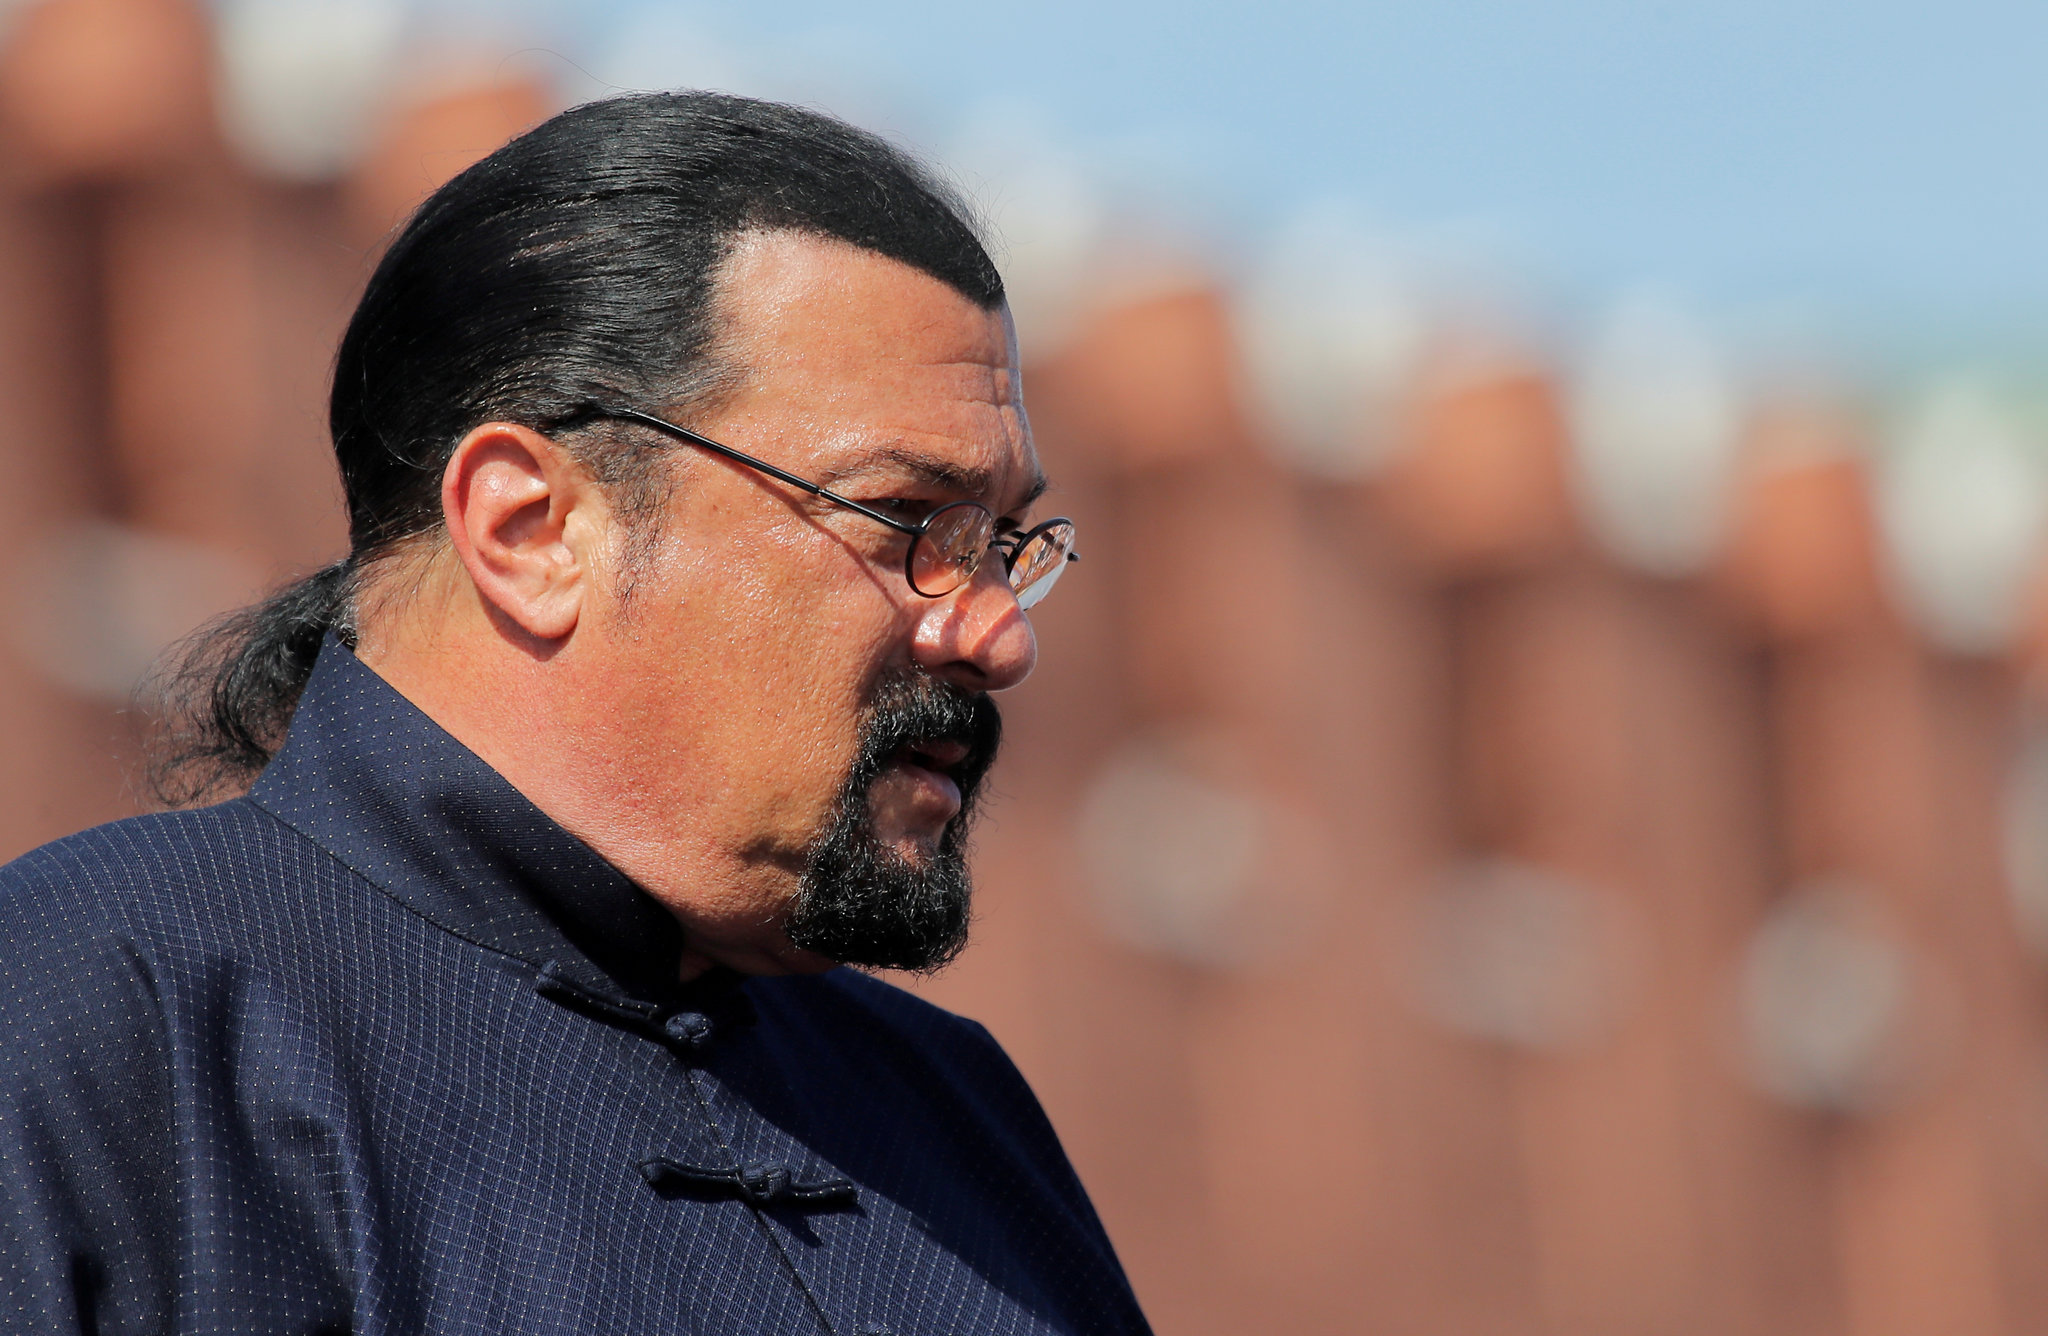 Steven Seagal advertised a fraudulent cryptostartup and fled to Moscow, refusing to pay a $255,000 fine